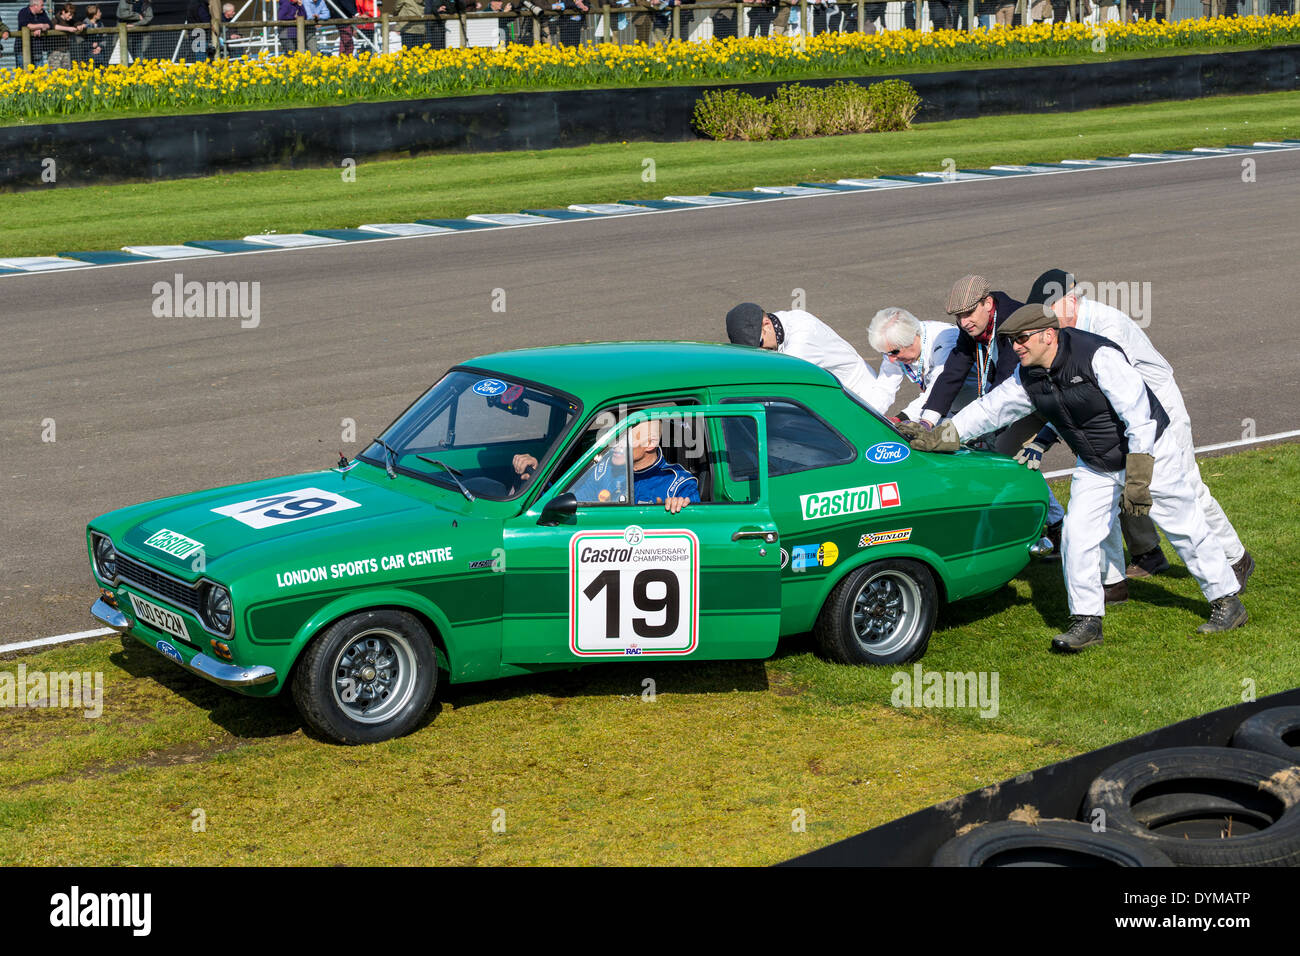 1974 Ford Escort MkI attended by marshals. Driver Peter Clements, Gerry Marshall Trophy Race. 72nd Goodwood Members meeting, UK. Stock Photo